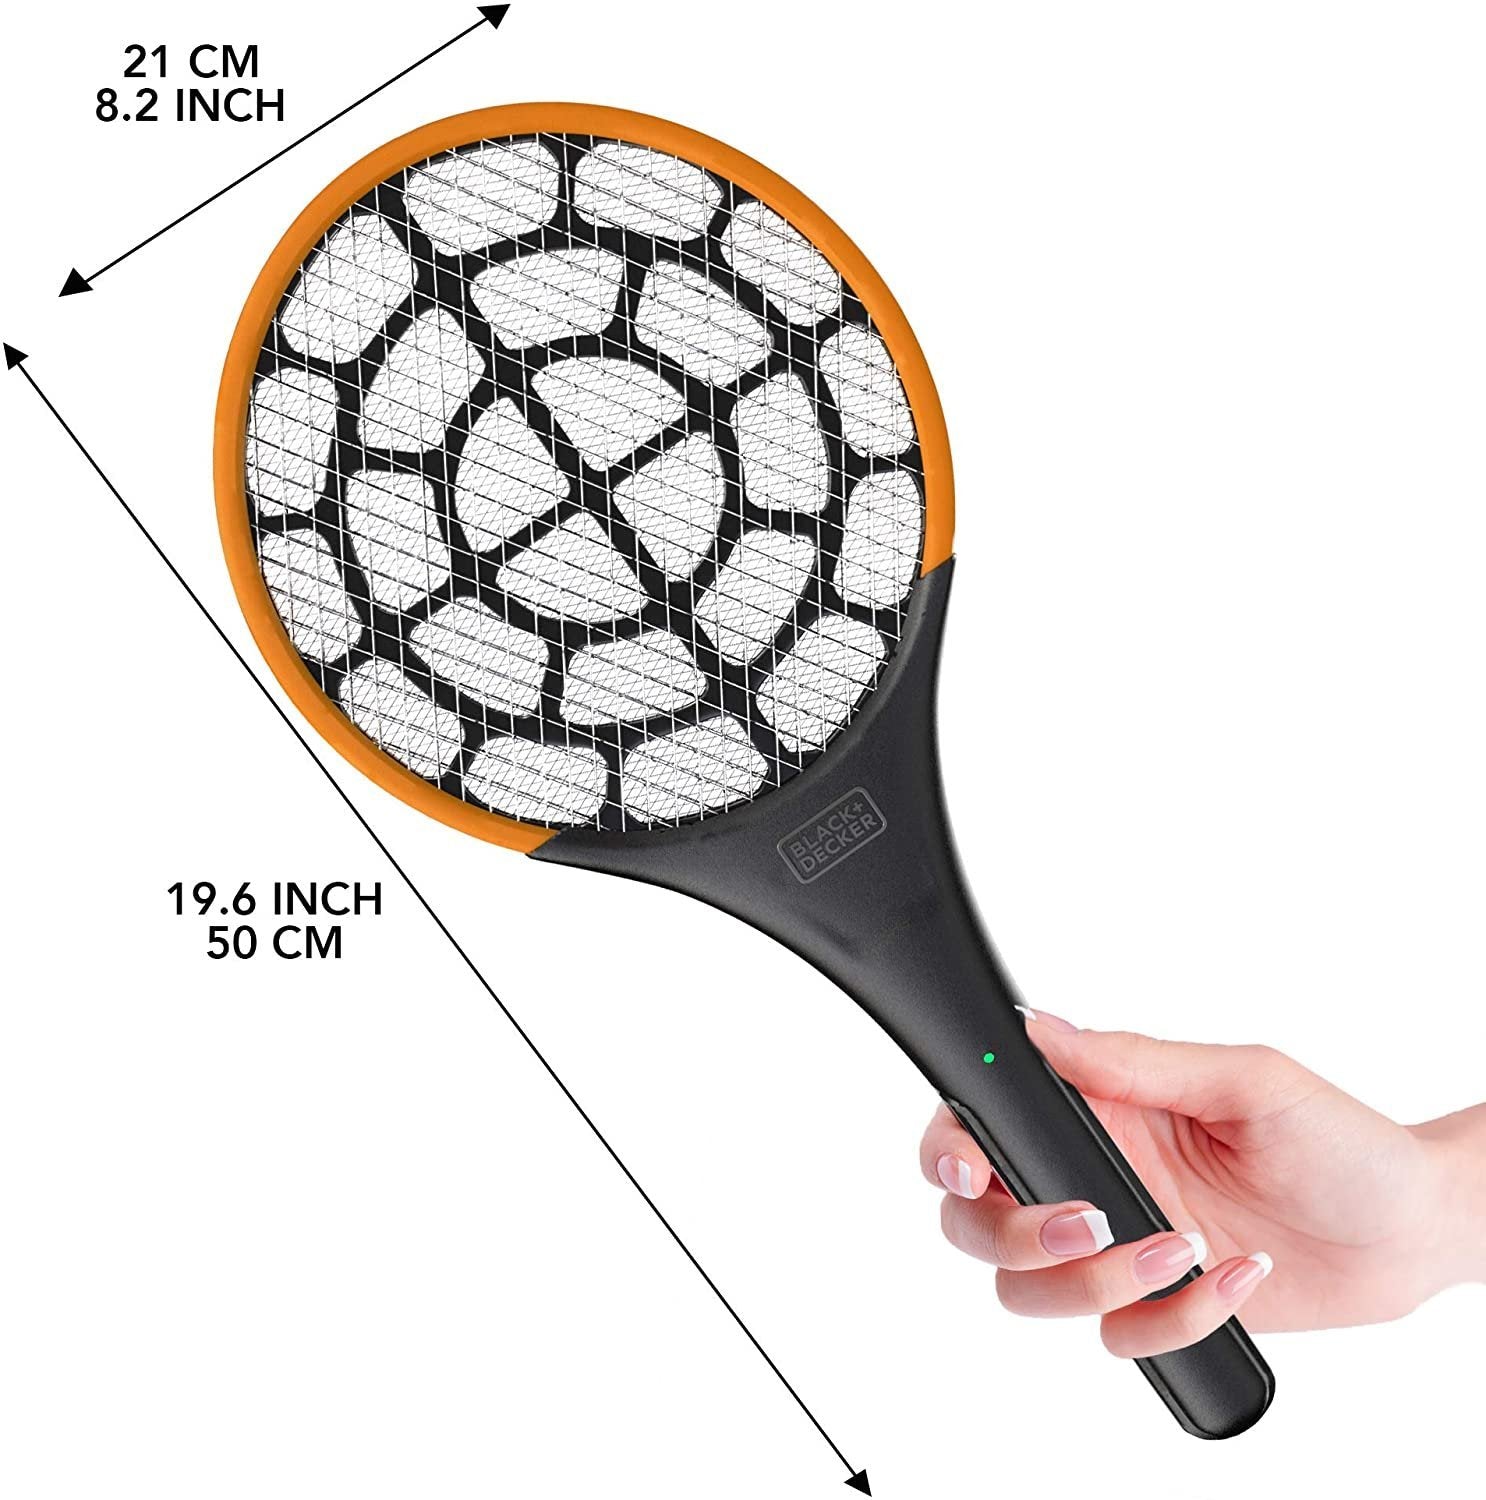 Black & Decker Electric Fly Swatter Tennis Racket | PRO 2.0 | Indoor & Outdoor | Battery Powered | Non-Toxic, Safe for Humans & Pets